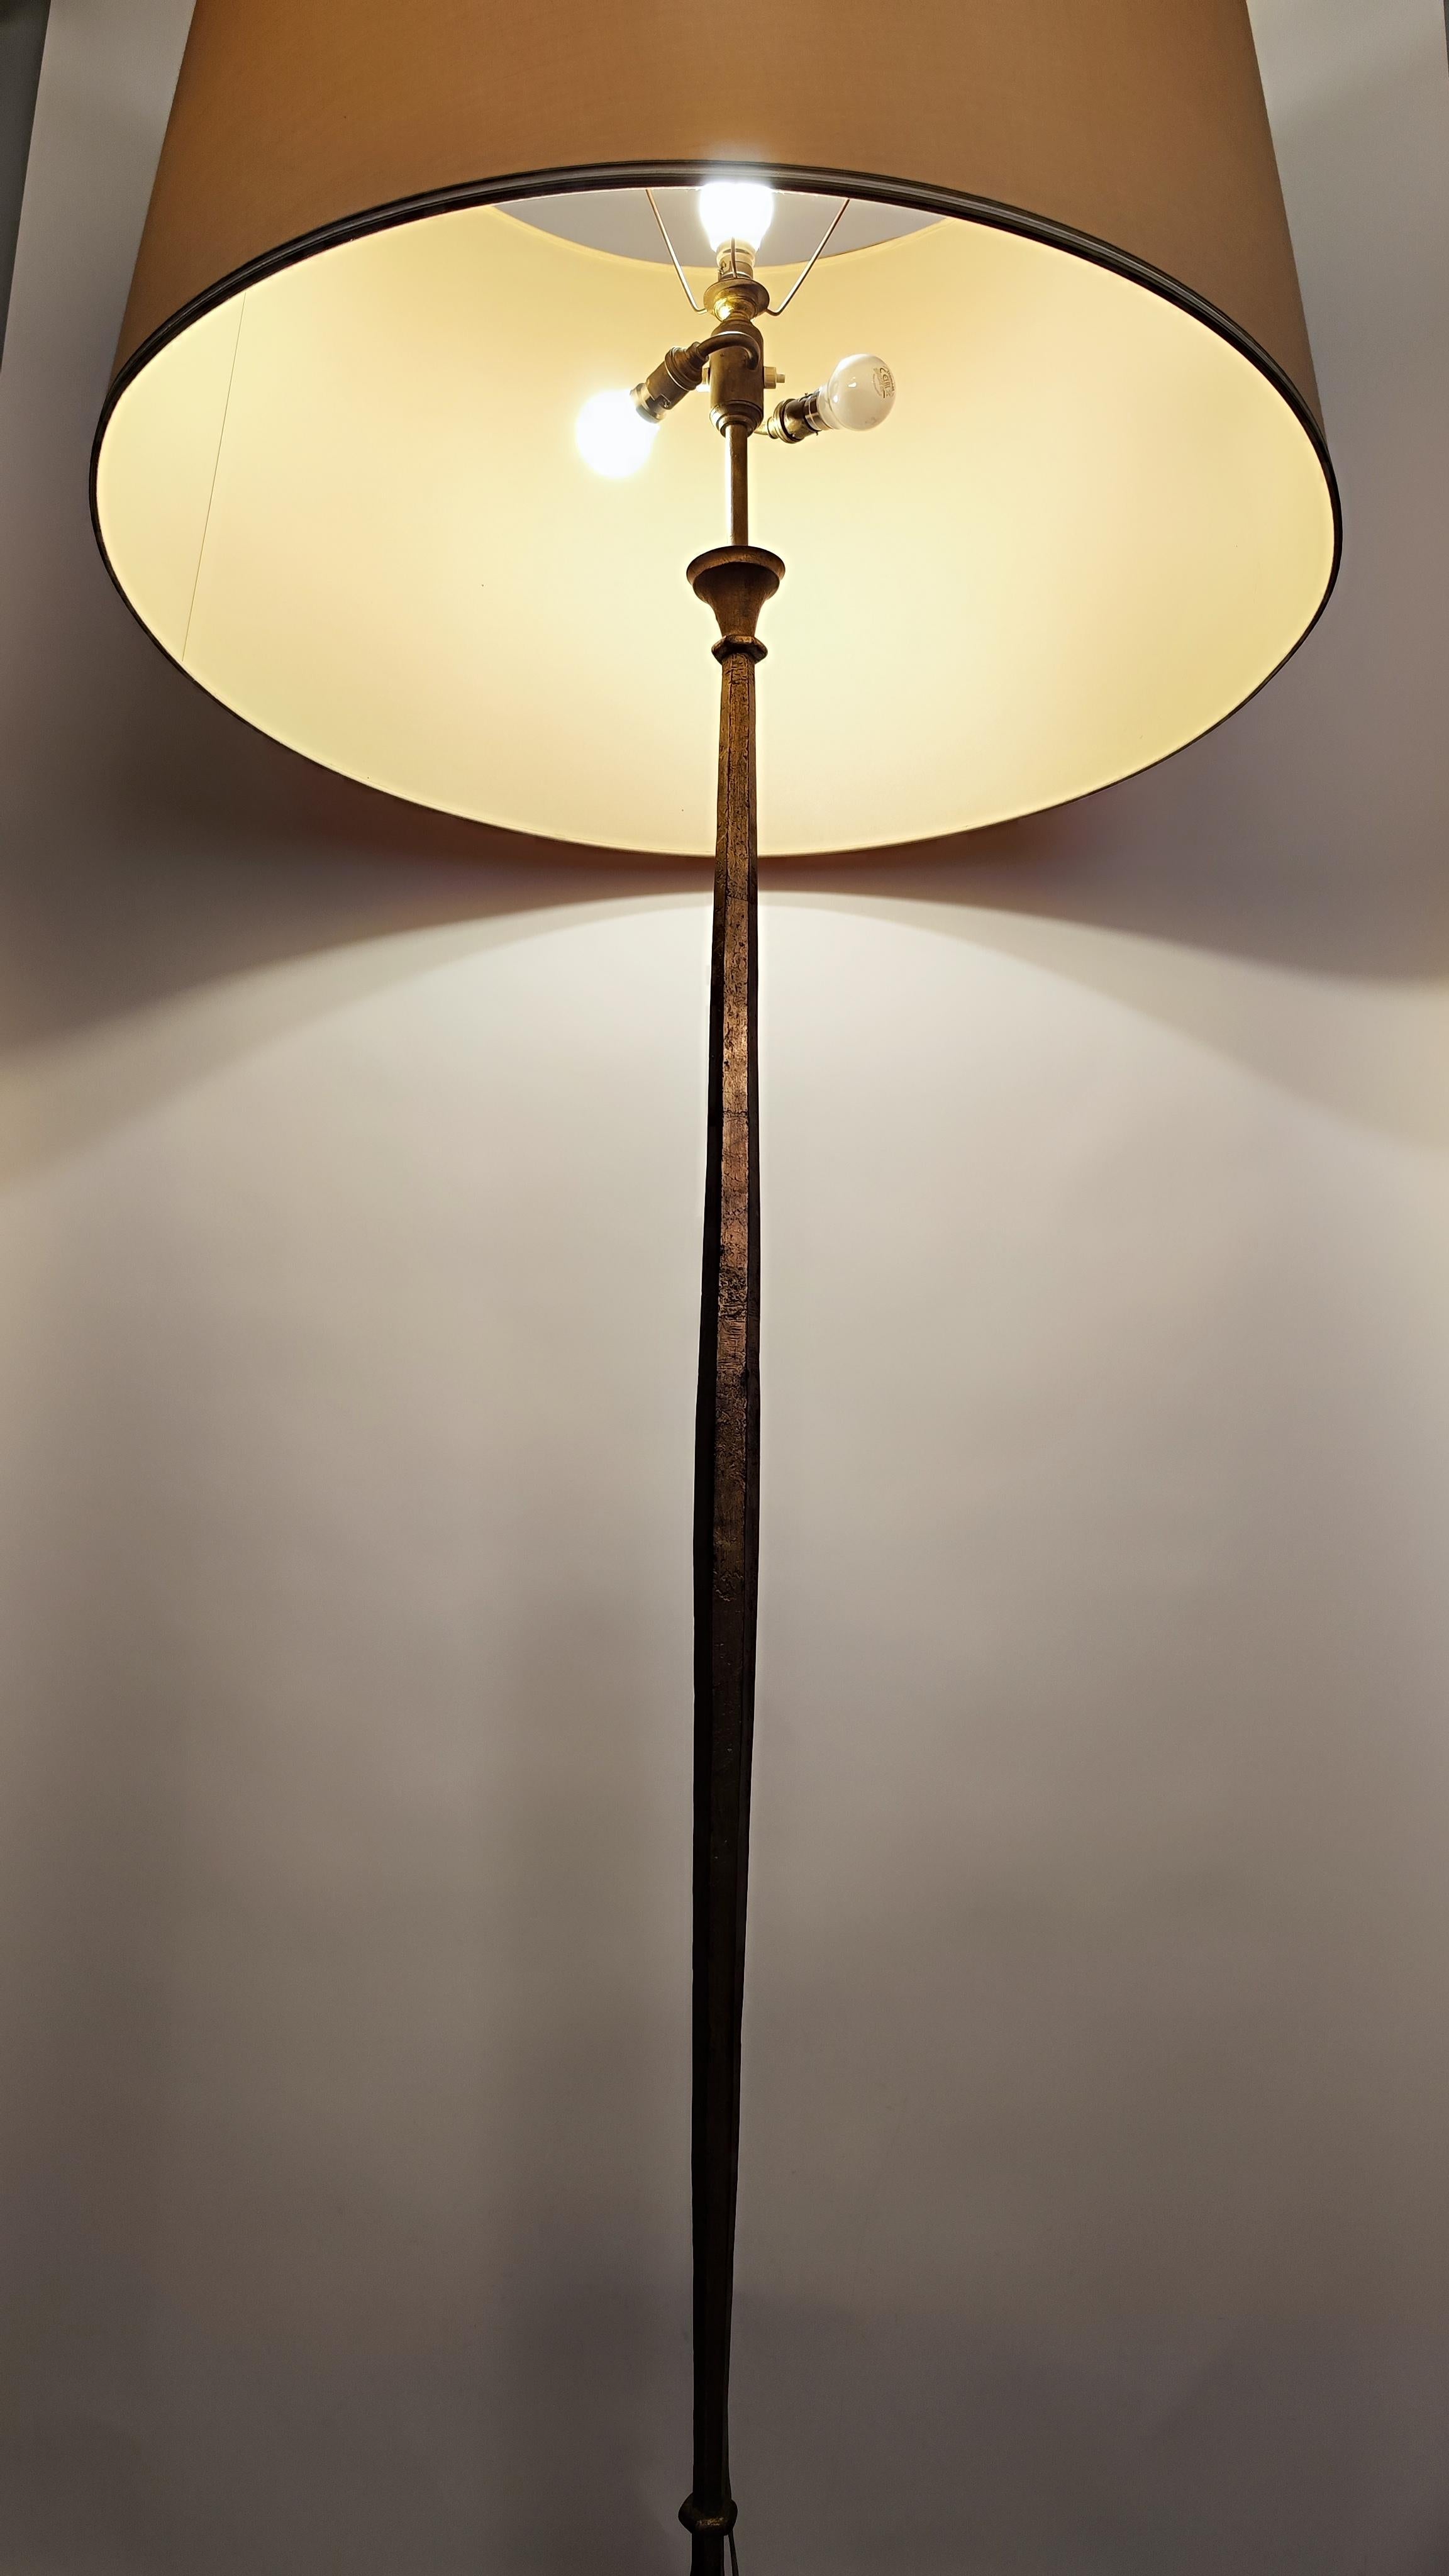 Mid-century gilded iron floor lamp, designed and manufactured by Maison Ramsay, Paris, France, circa 1950-1960. 
.
The lines are very clean and precise ; the lamp is made of gilded beaten iron.
.
The central shaft of the lamp has an exceptional